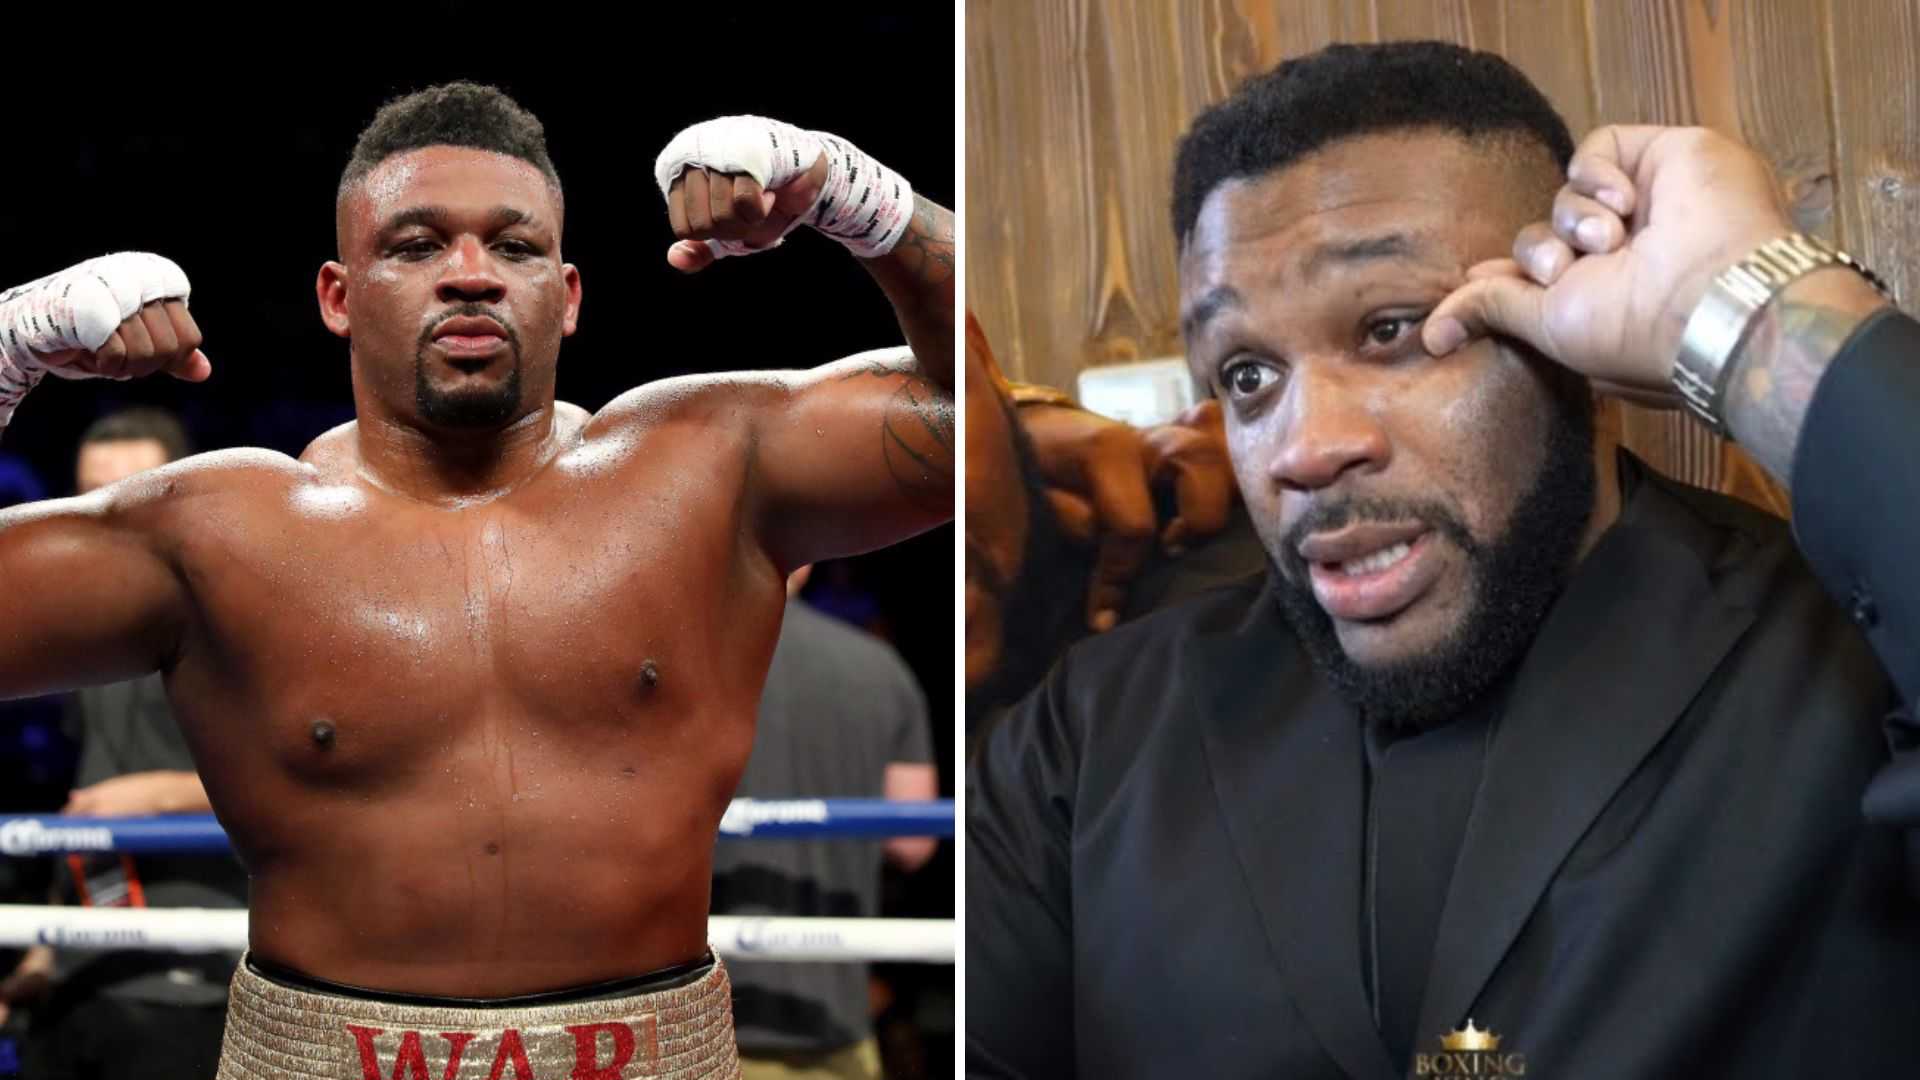 Heavyweight Boxer Jarrell Miller Converts to Islam with 2 Others